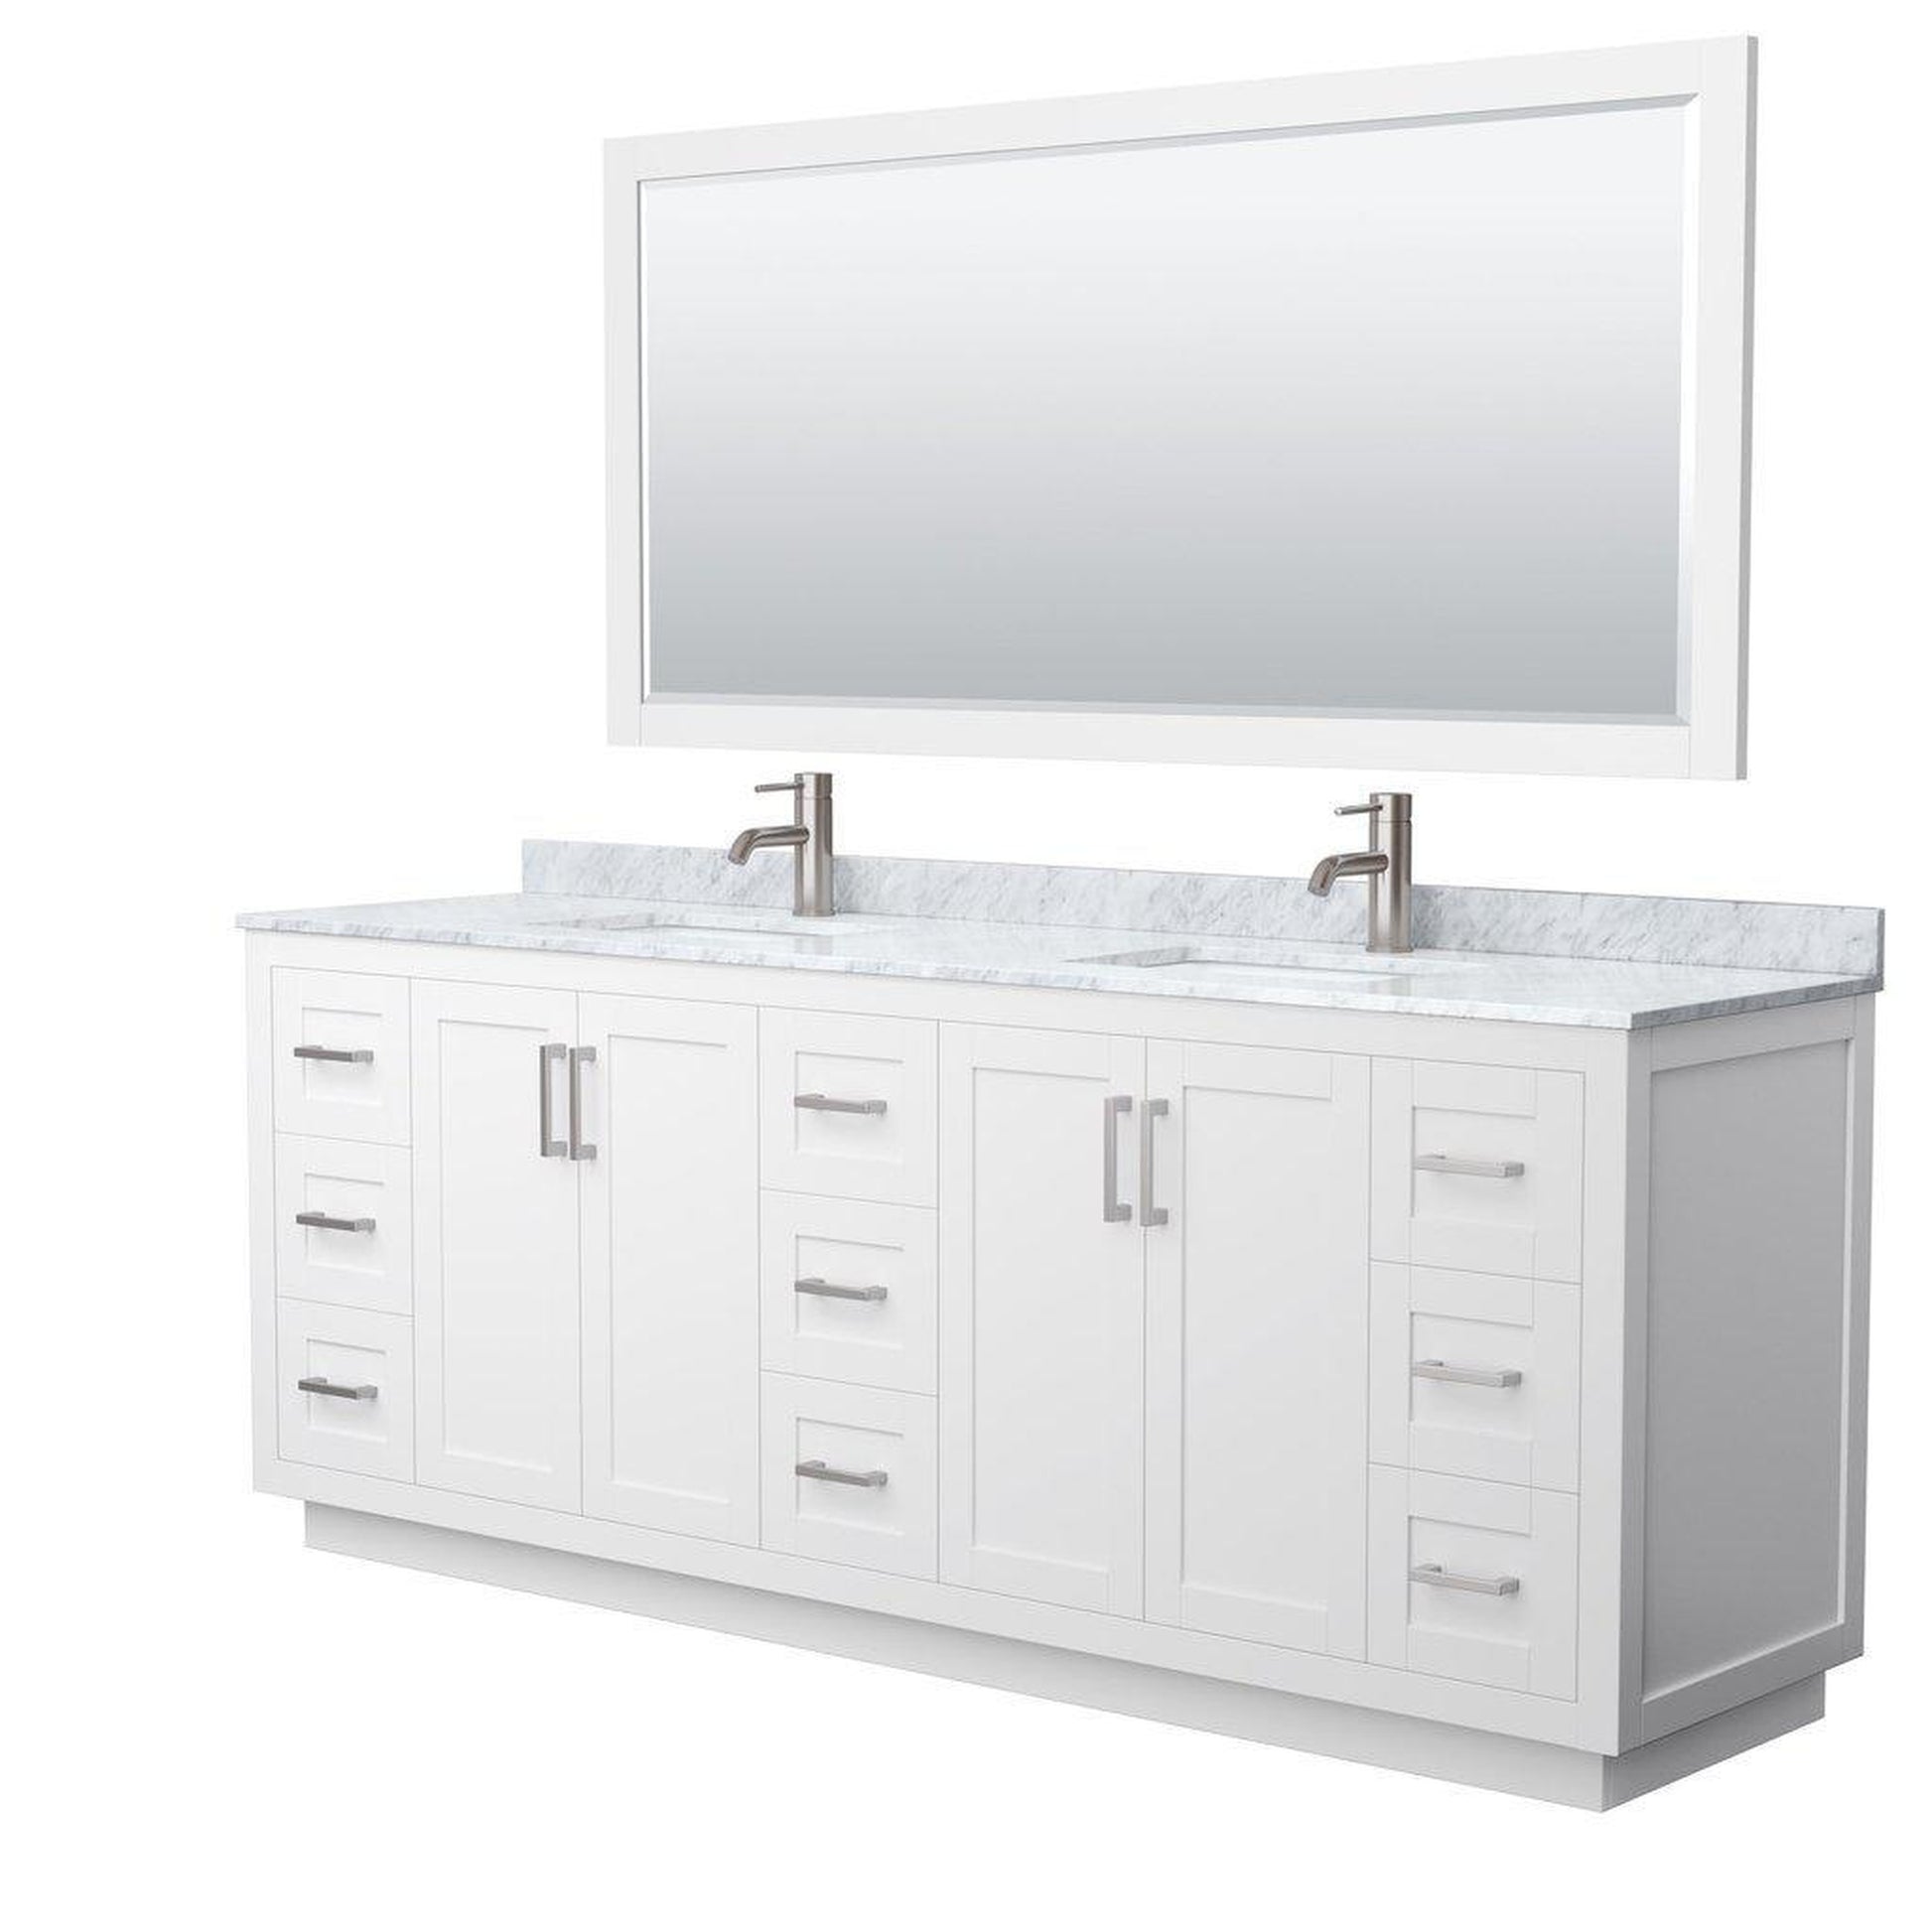 Wyndham Collection Miranda 84" Double Bathroom White Vanity Set With White Carrara Marble Countertop, Undermount Square Sink, 70" Mirror And Brushed Nickel Trim